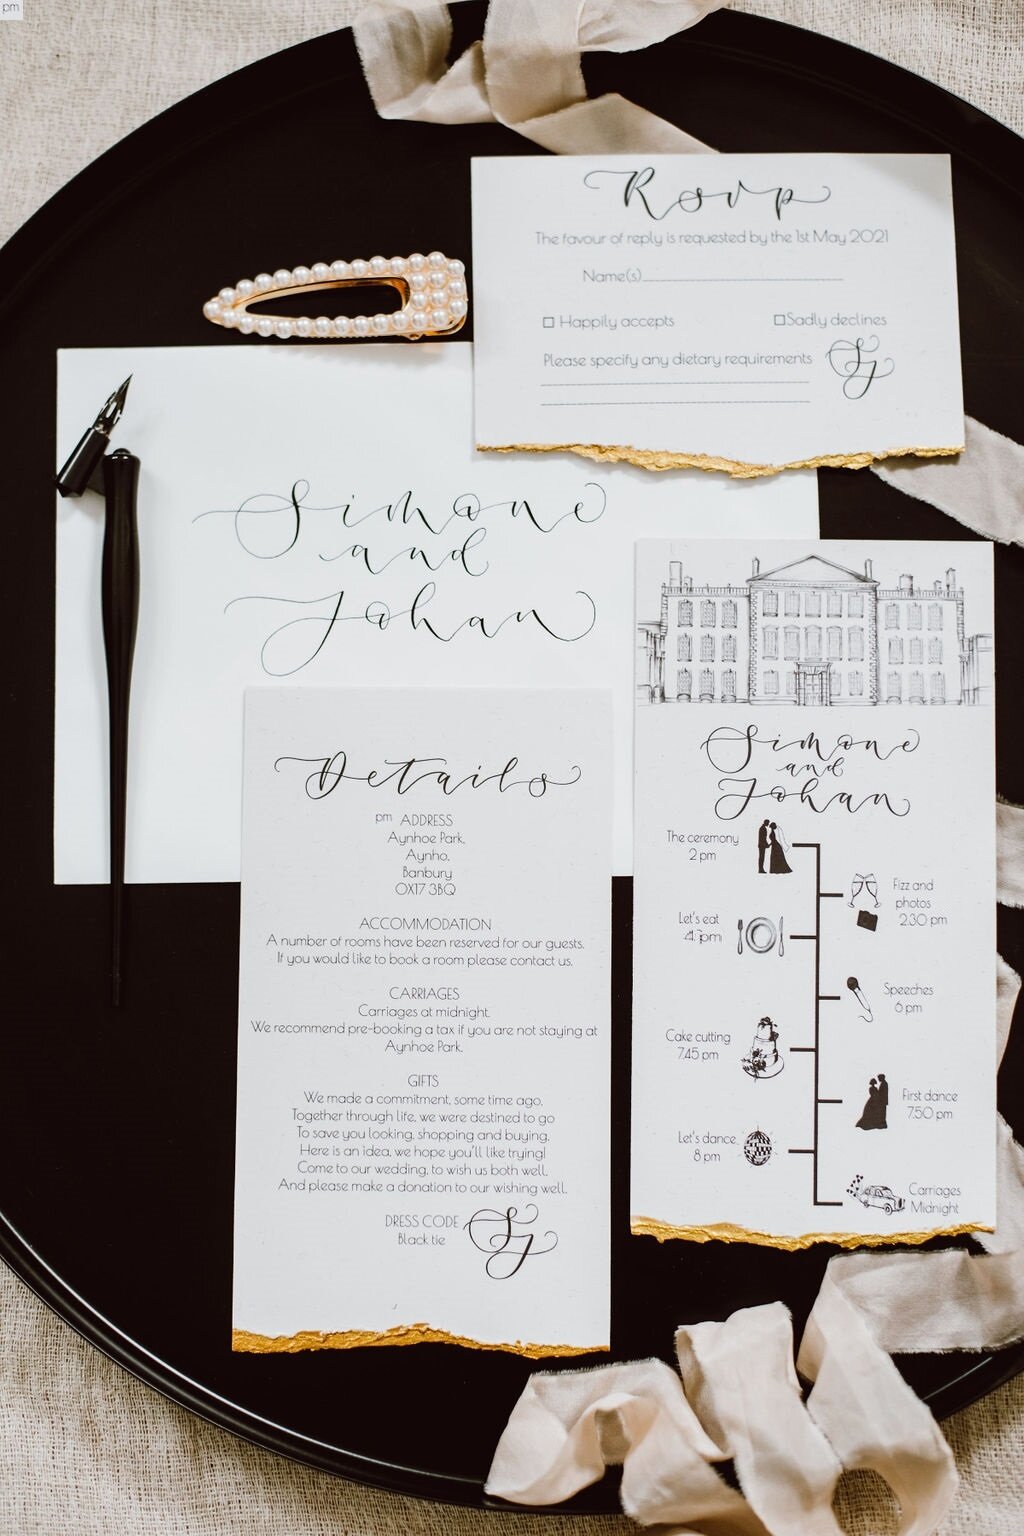 Monochrome Aynhoe Park invitation suite printed on recycled paper with gold details by The Amyverse - Wedding timeline, rsvp card and information card.jpg